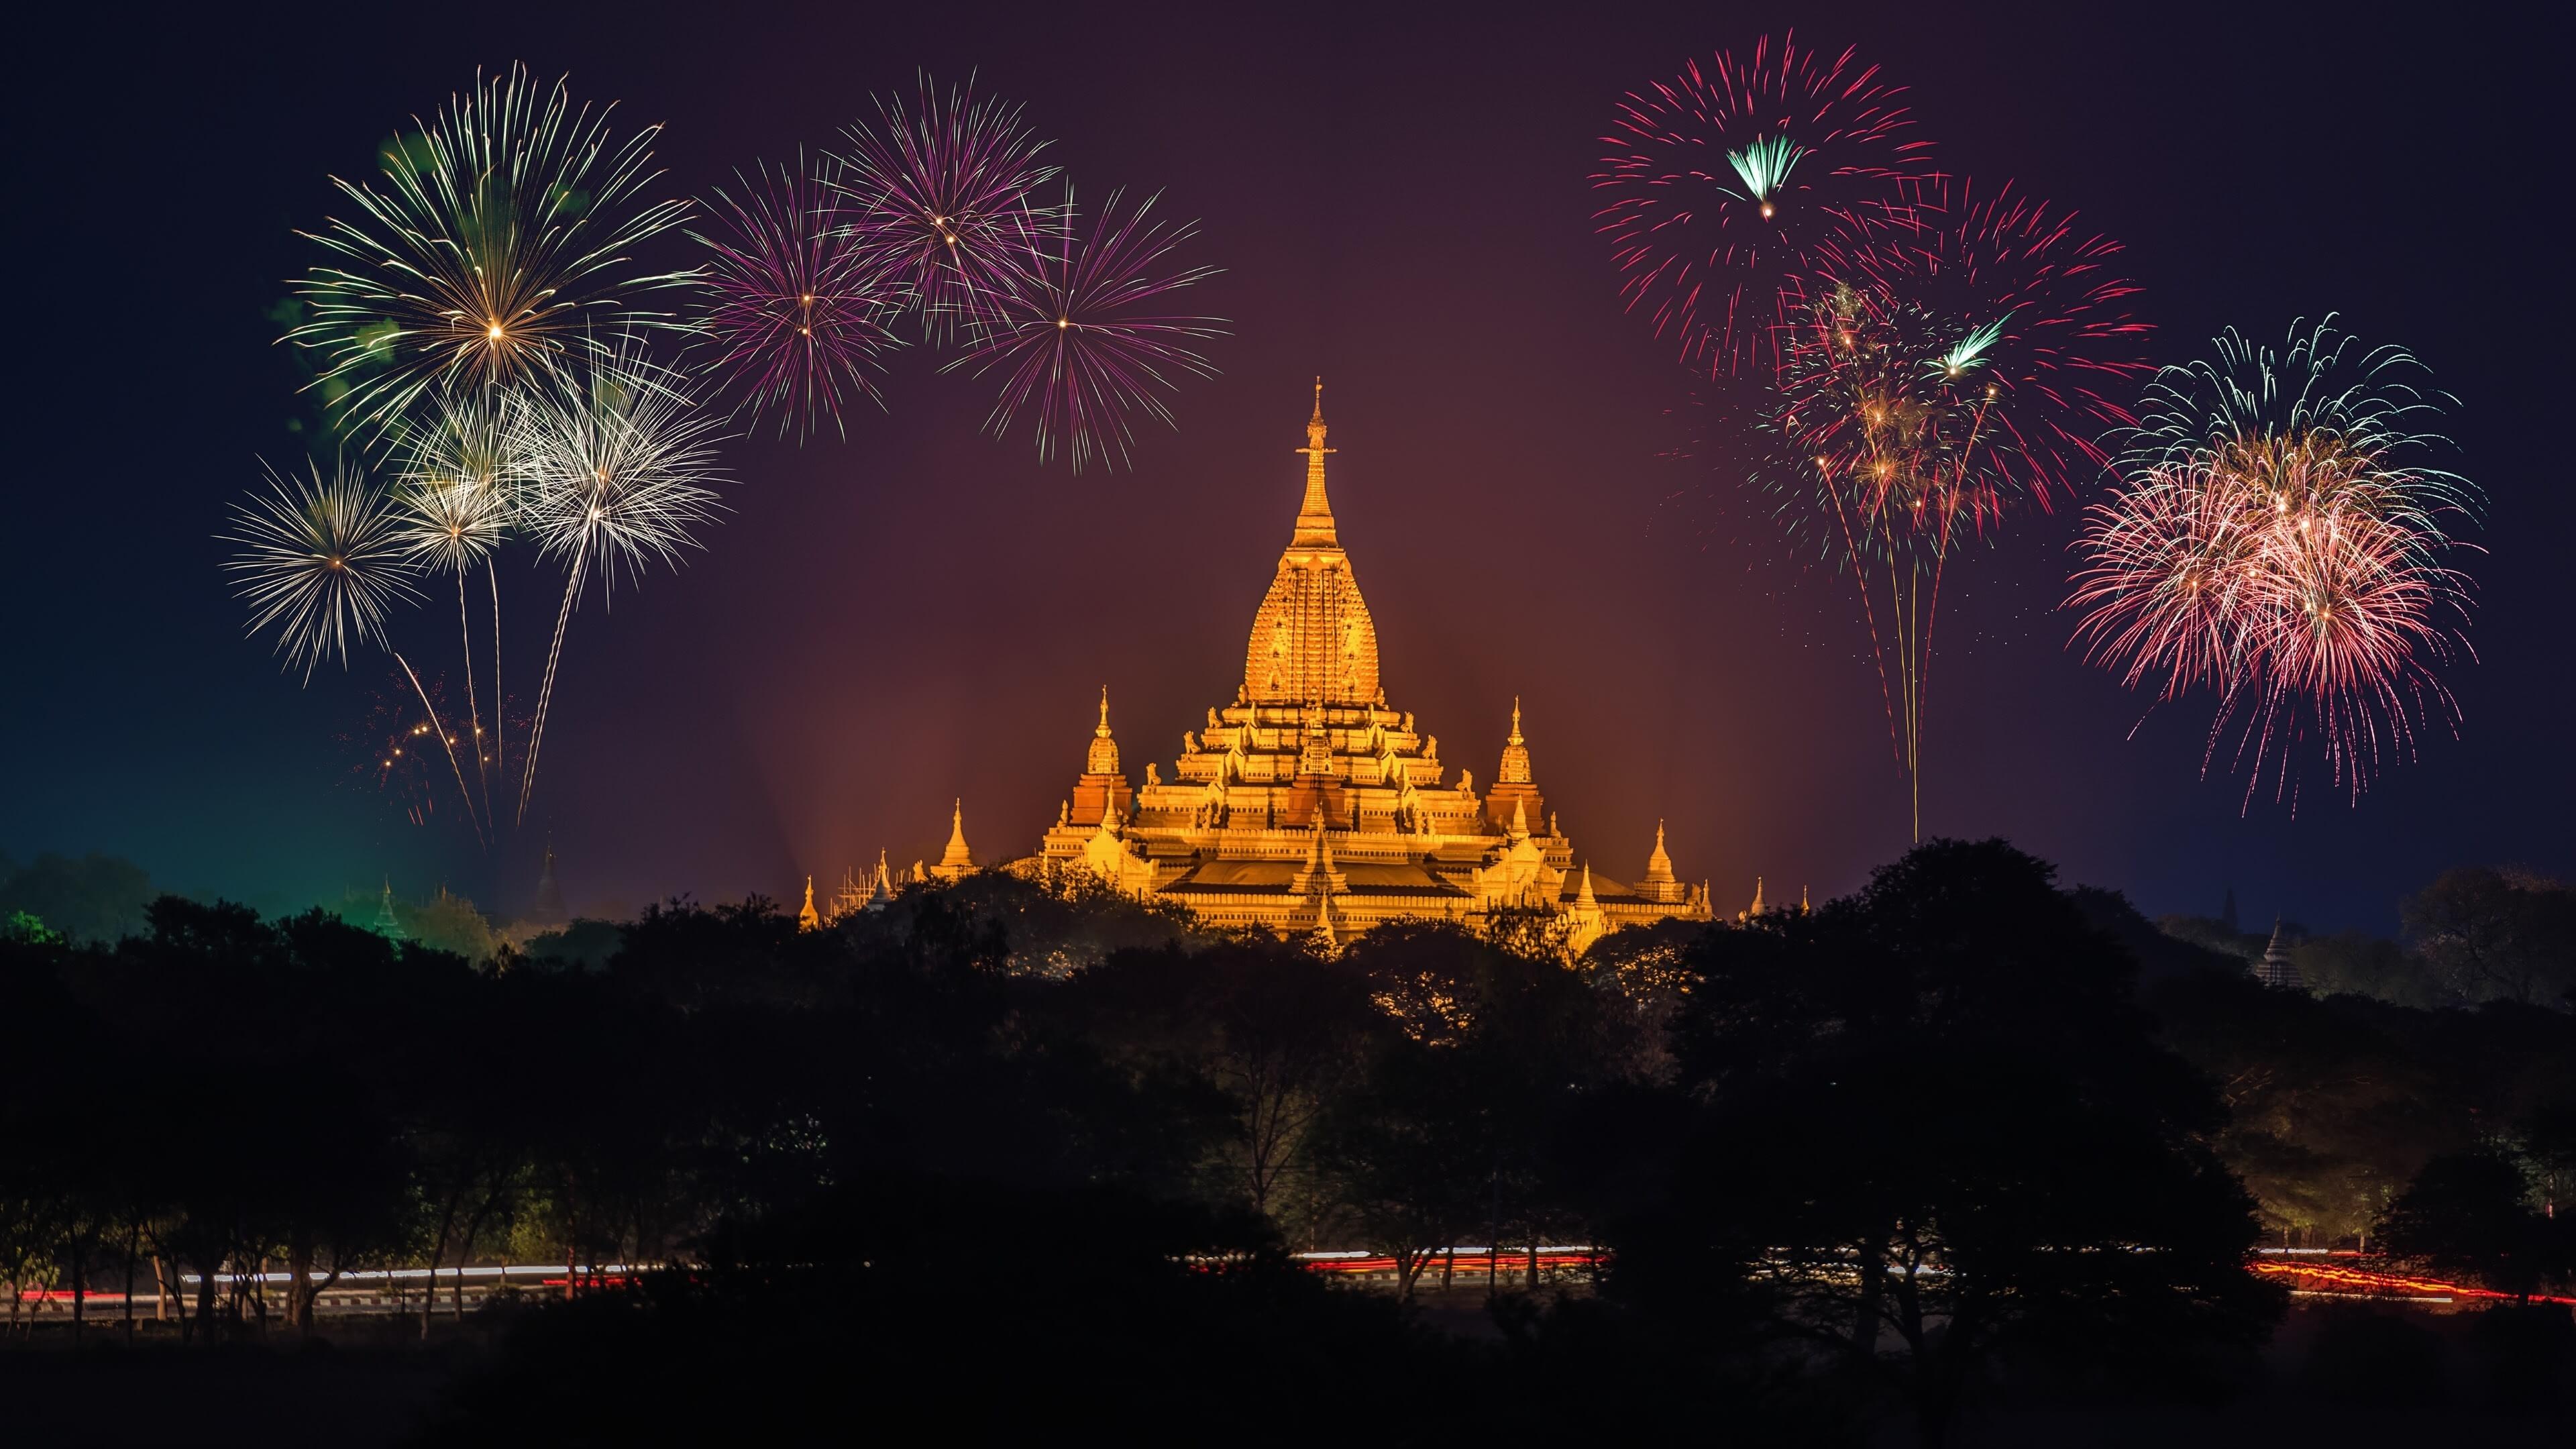 ananda-temple-fireworks-myanmar-others-9818